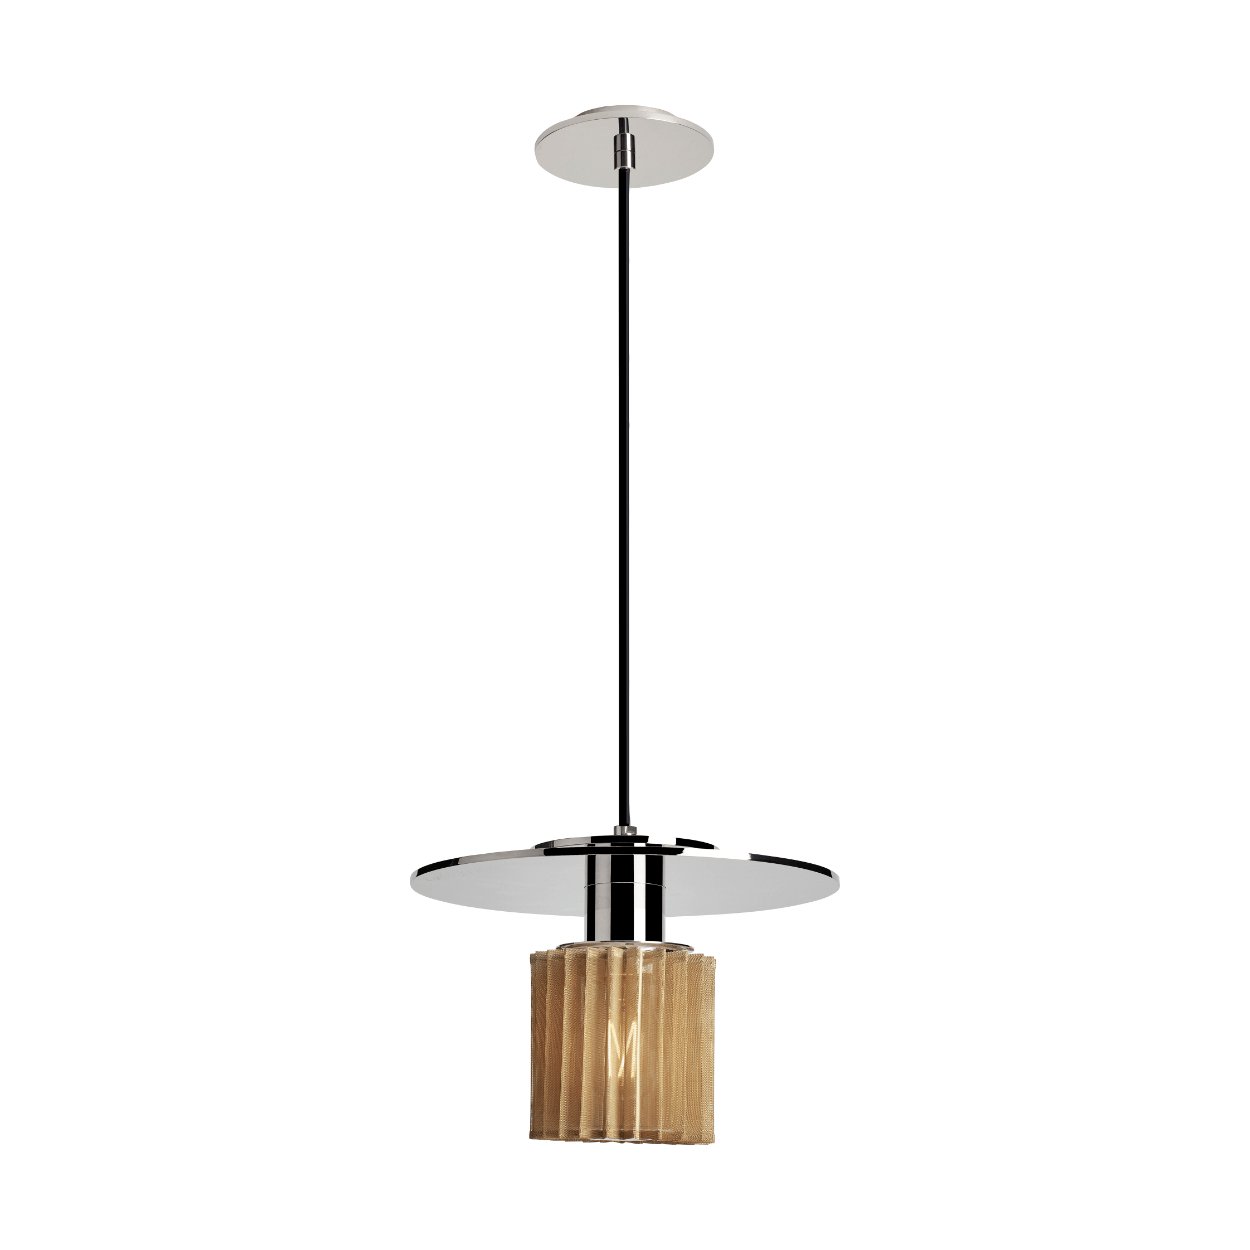 DCW éditions In The Sun Ceiling Pendant